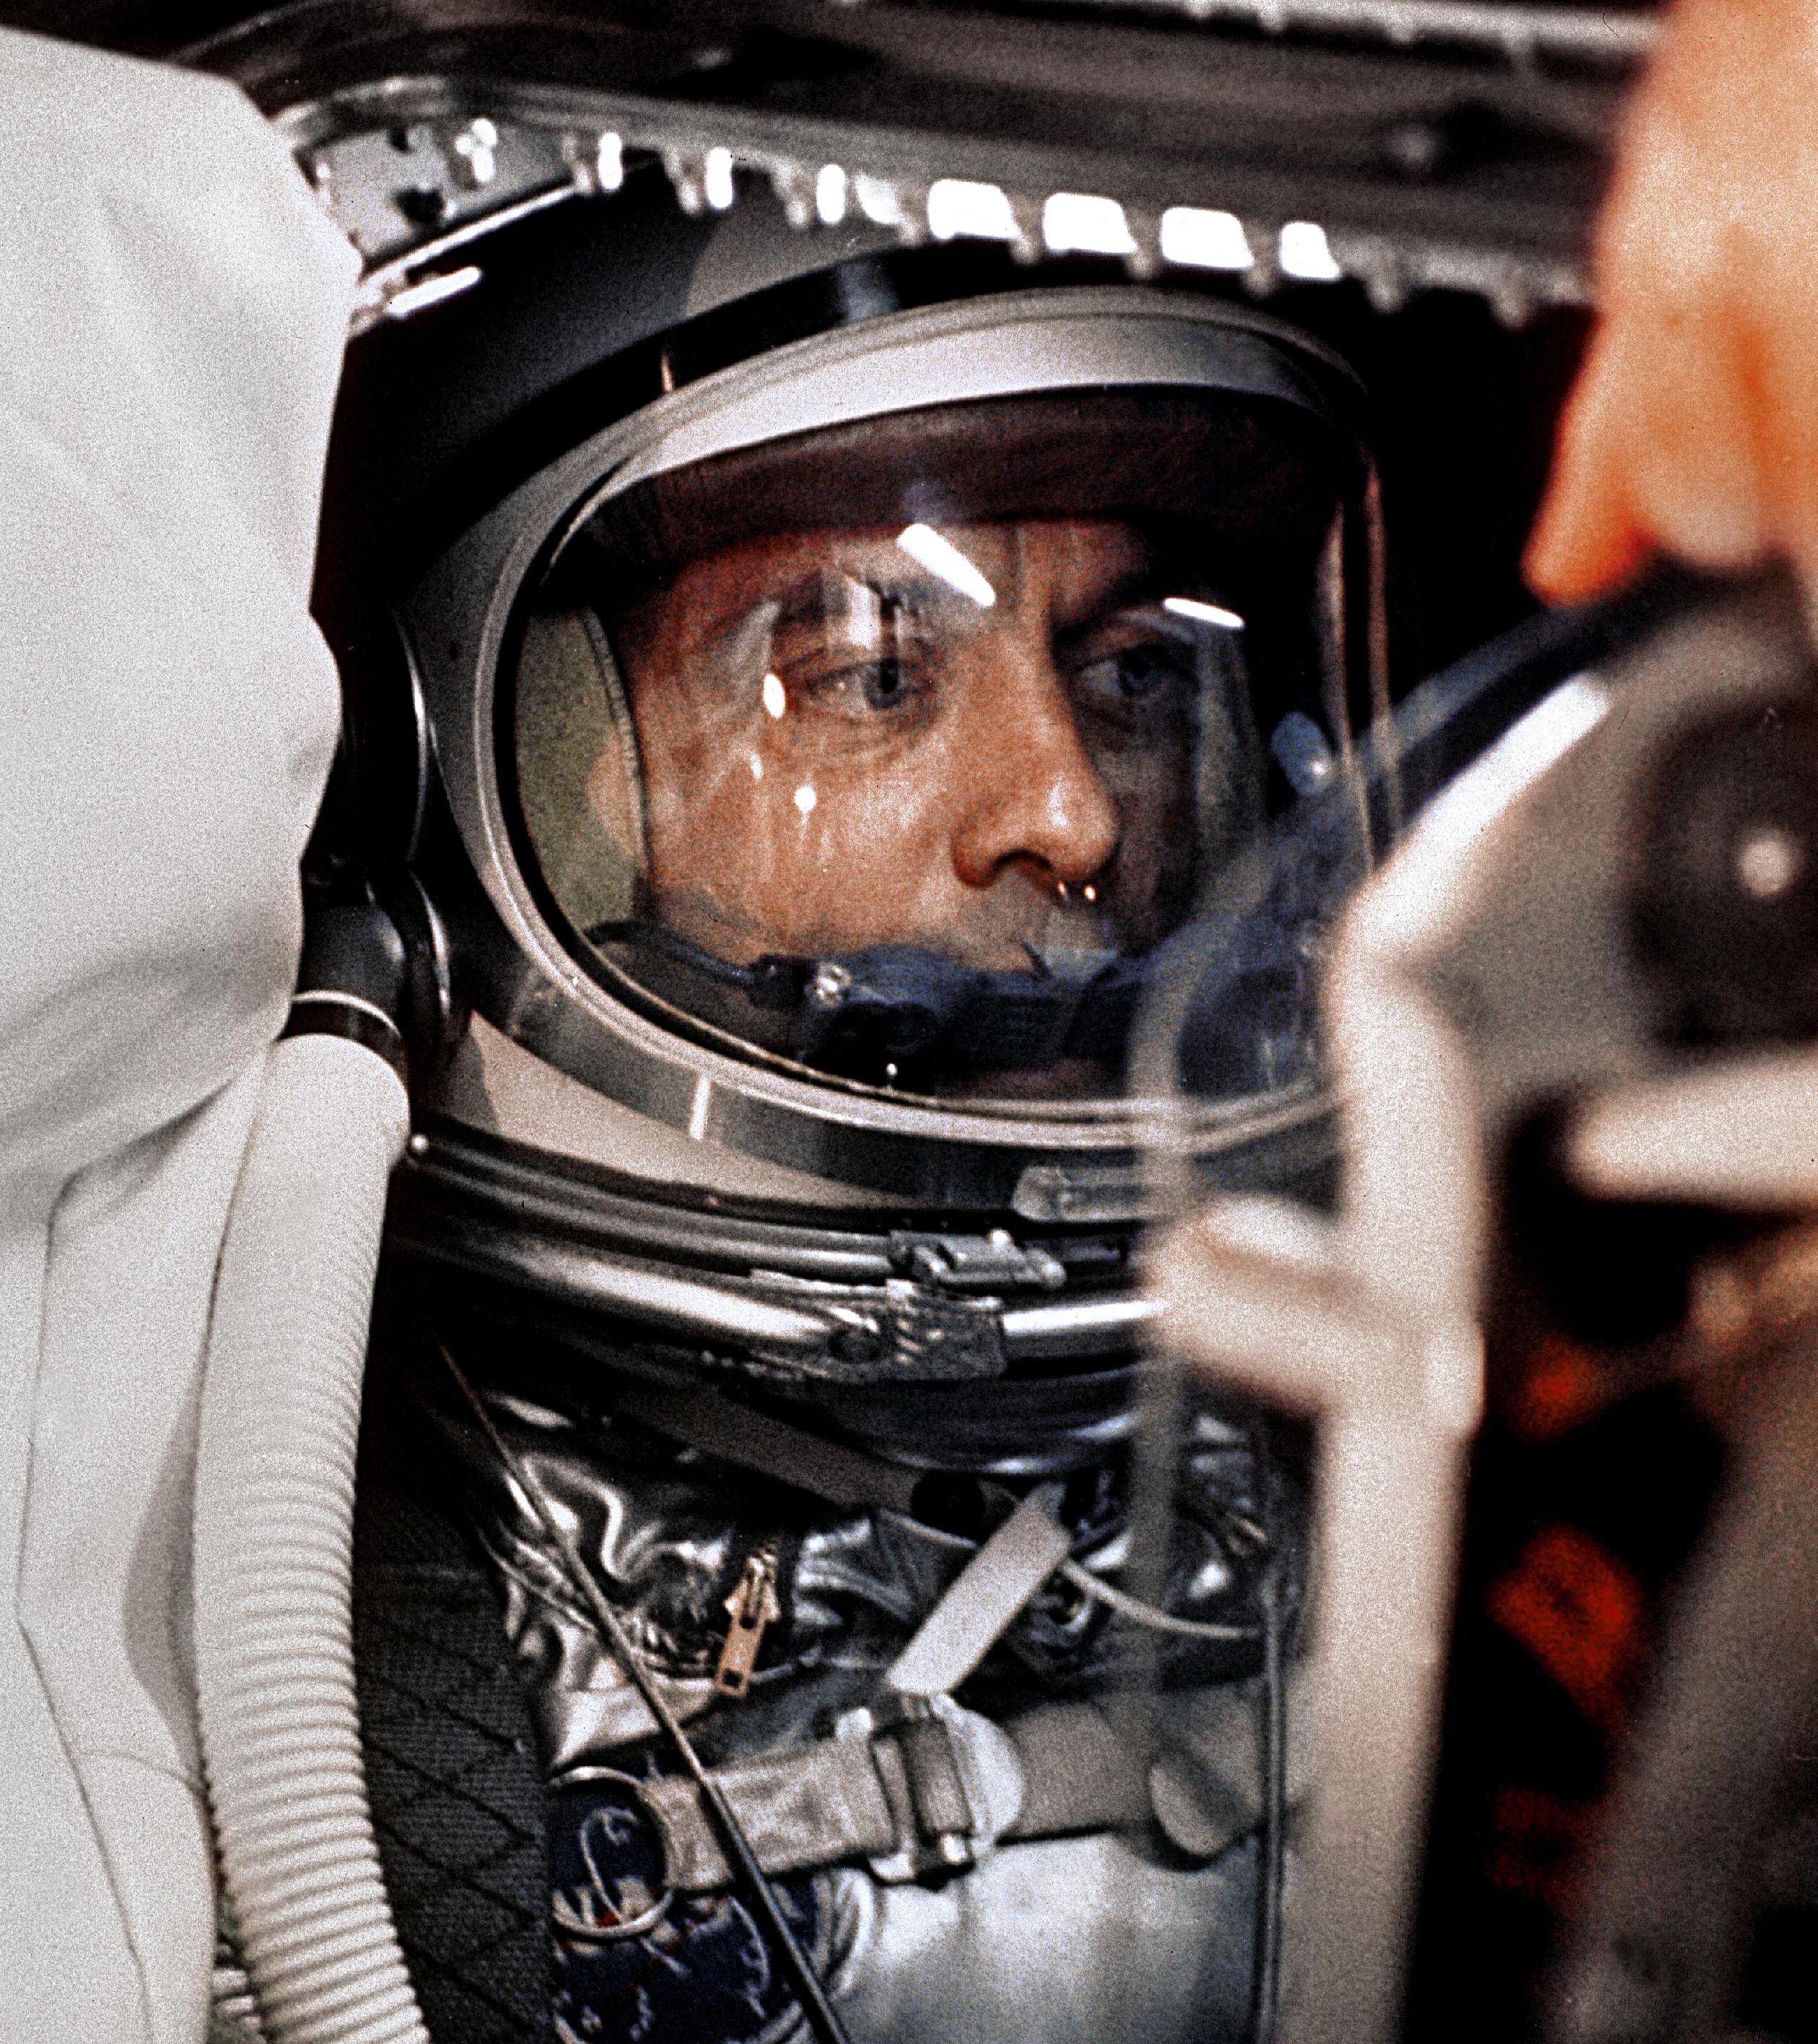 6 Sizes New Photo 1st American in Space Alan Shepard Recovery after Freedom 7 